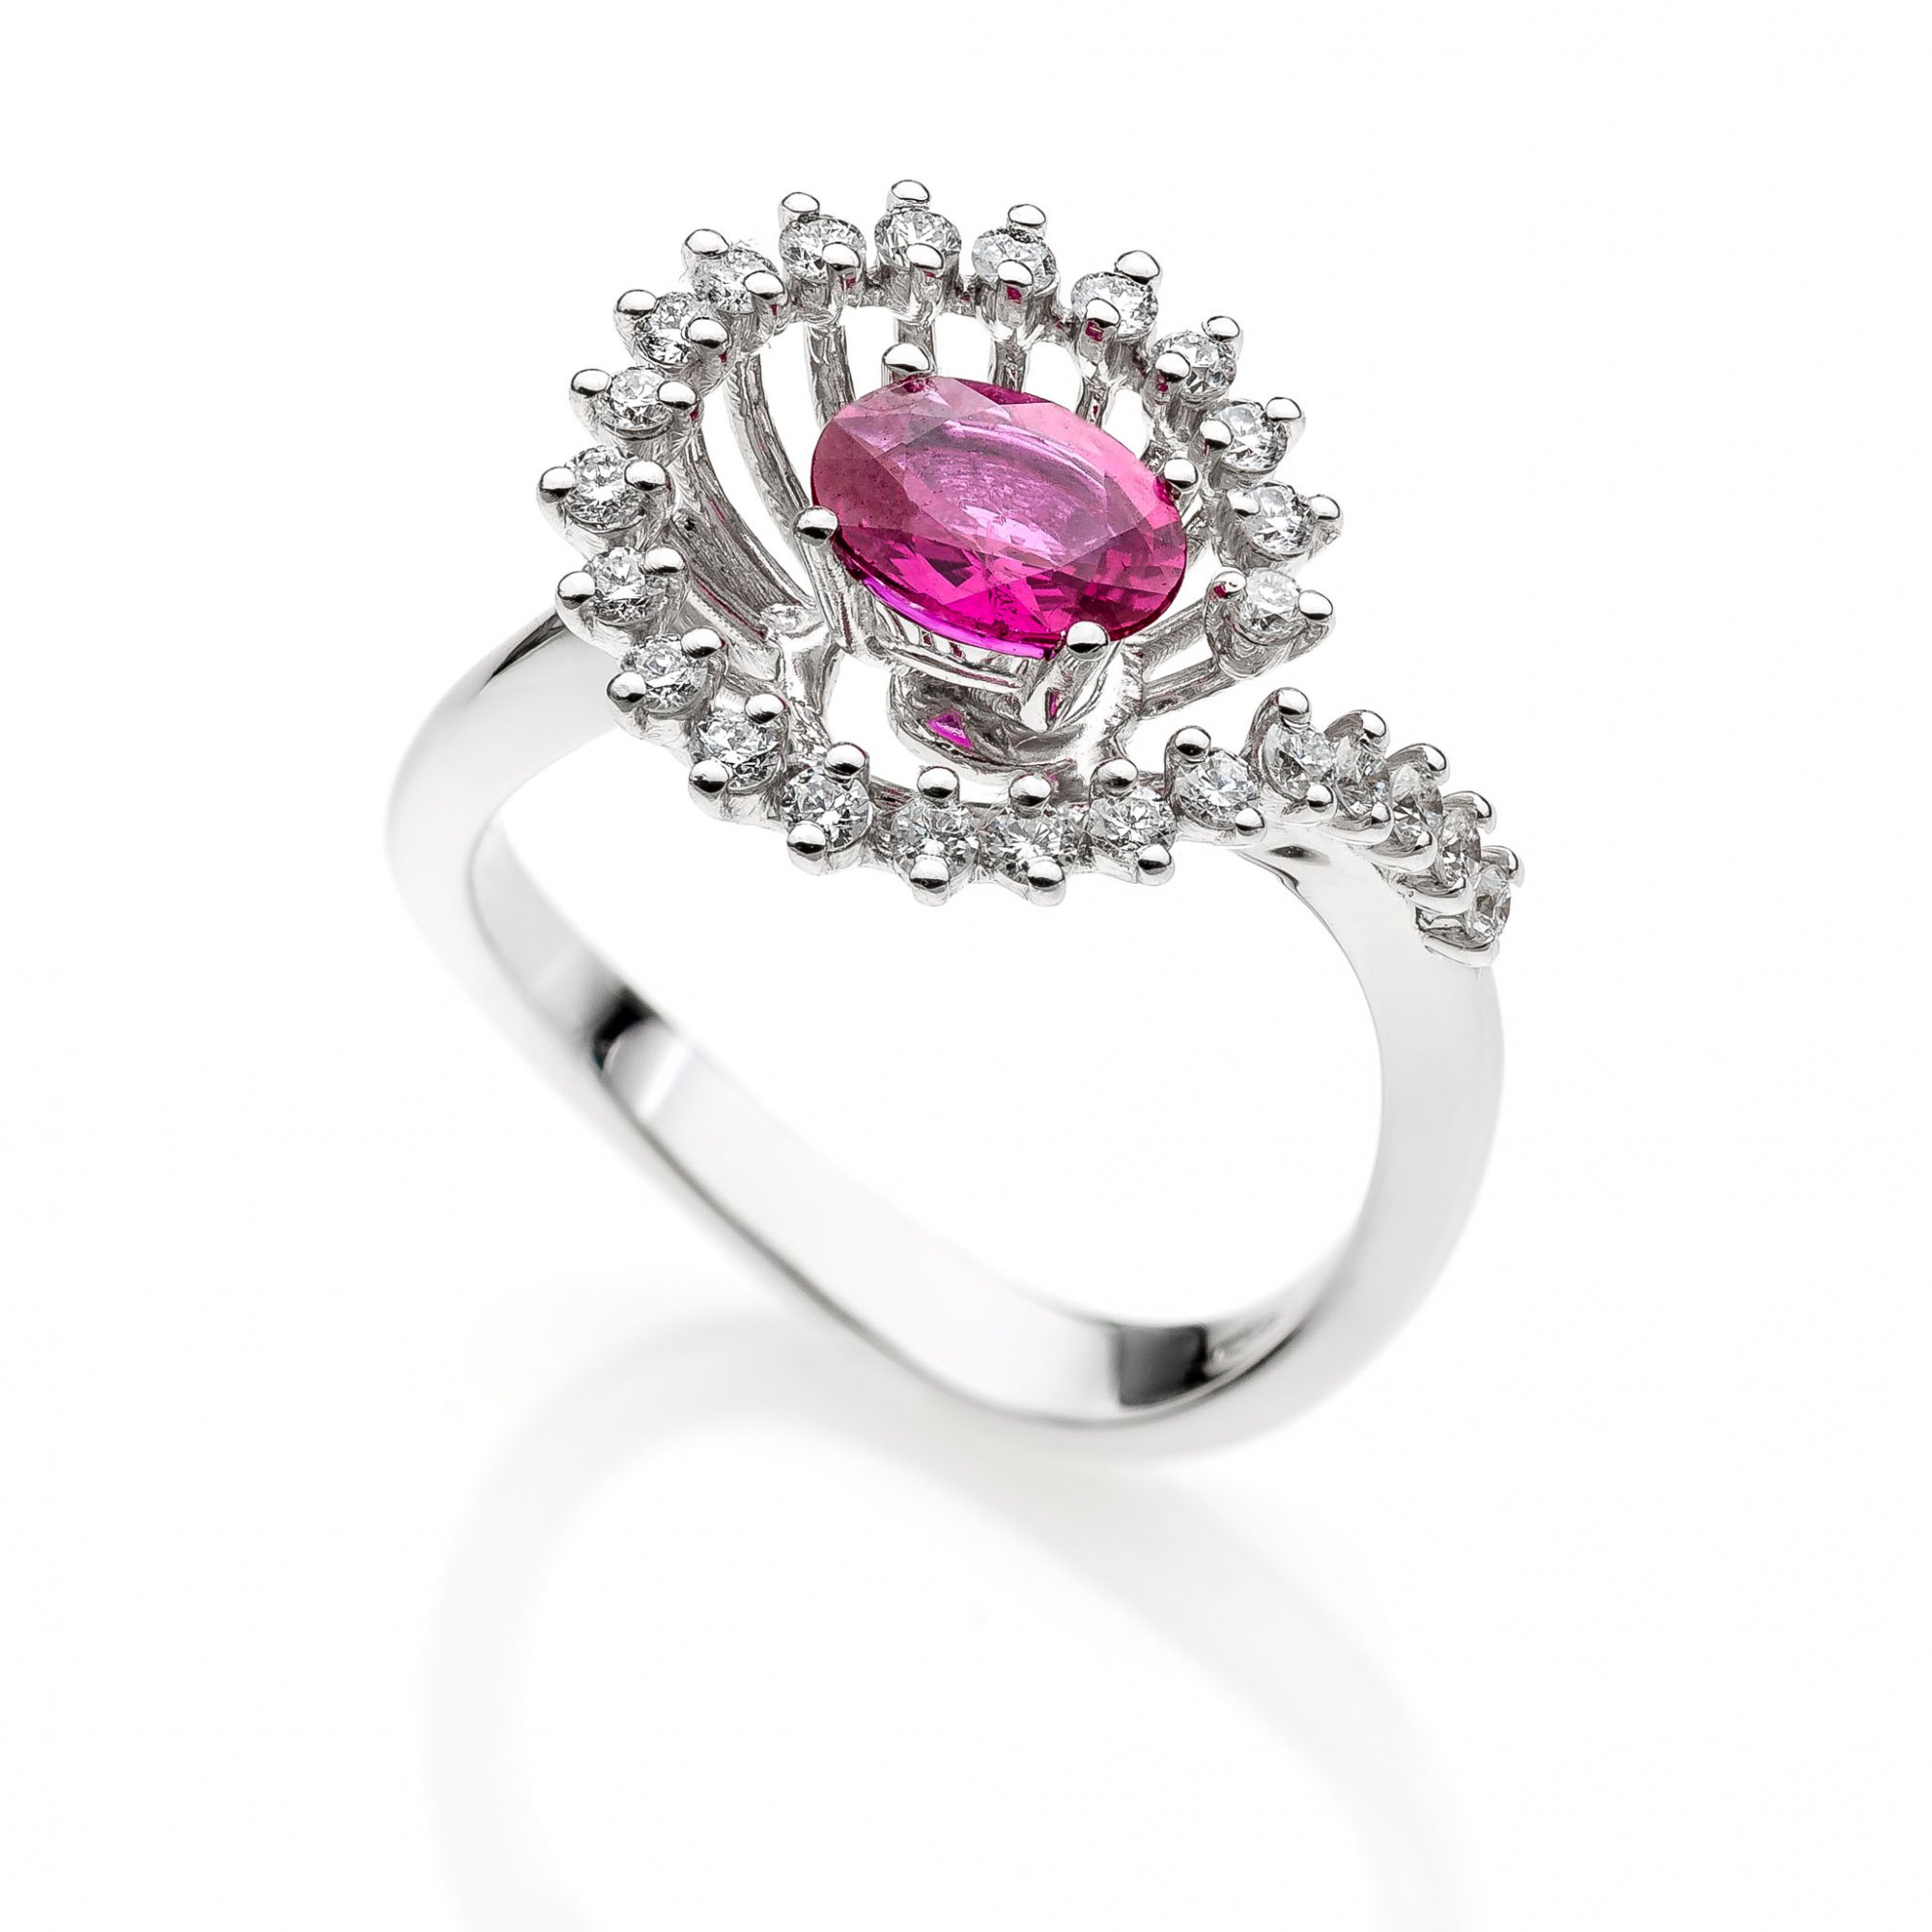 18 KT white gold ring with natural Burma Ruby and round brilliant cut diamonds